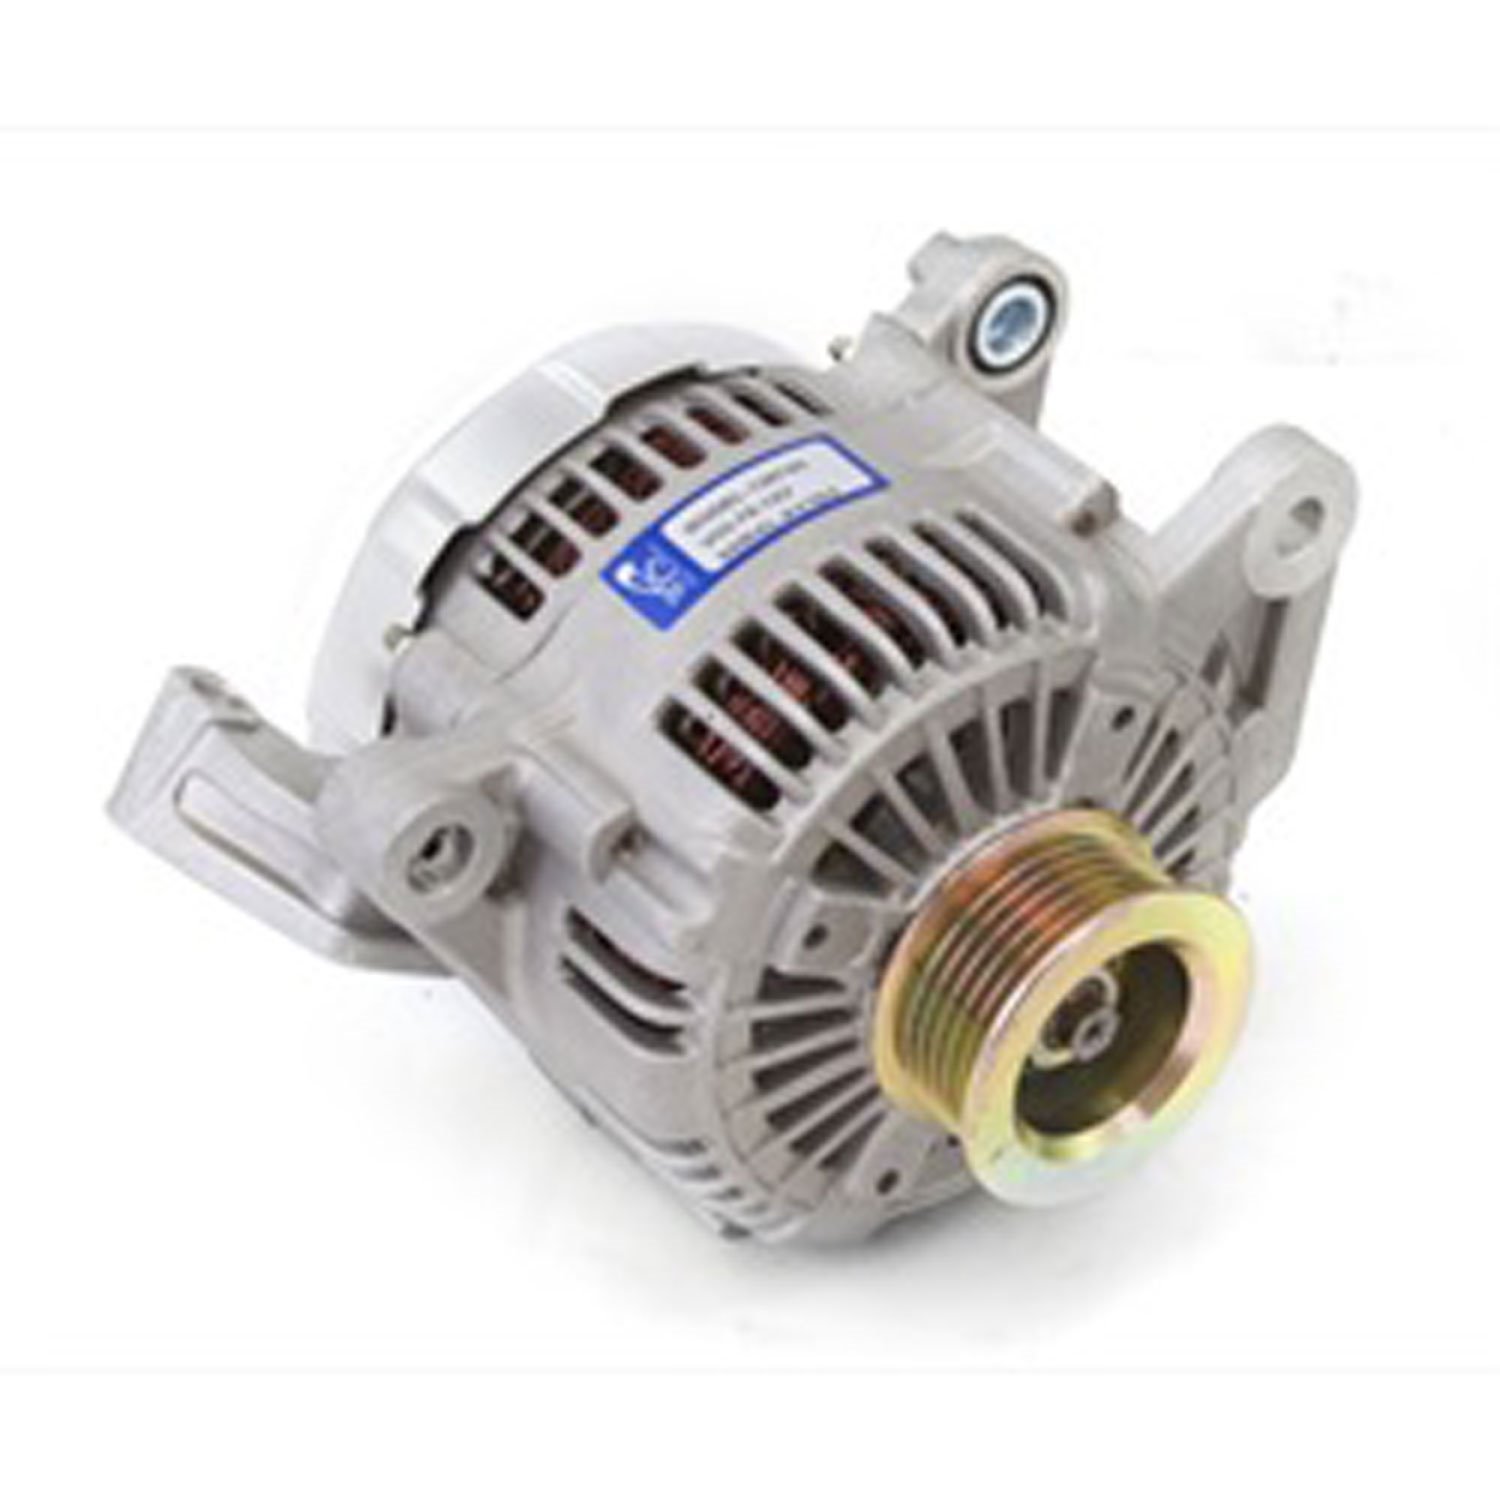 This 136 amp replacement alternator from Omix-ADA fits 99-04 Jeep Grand Cherokee models with 4.0L &